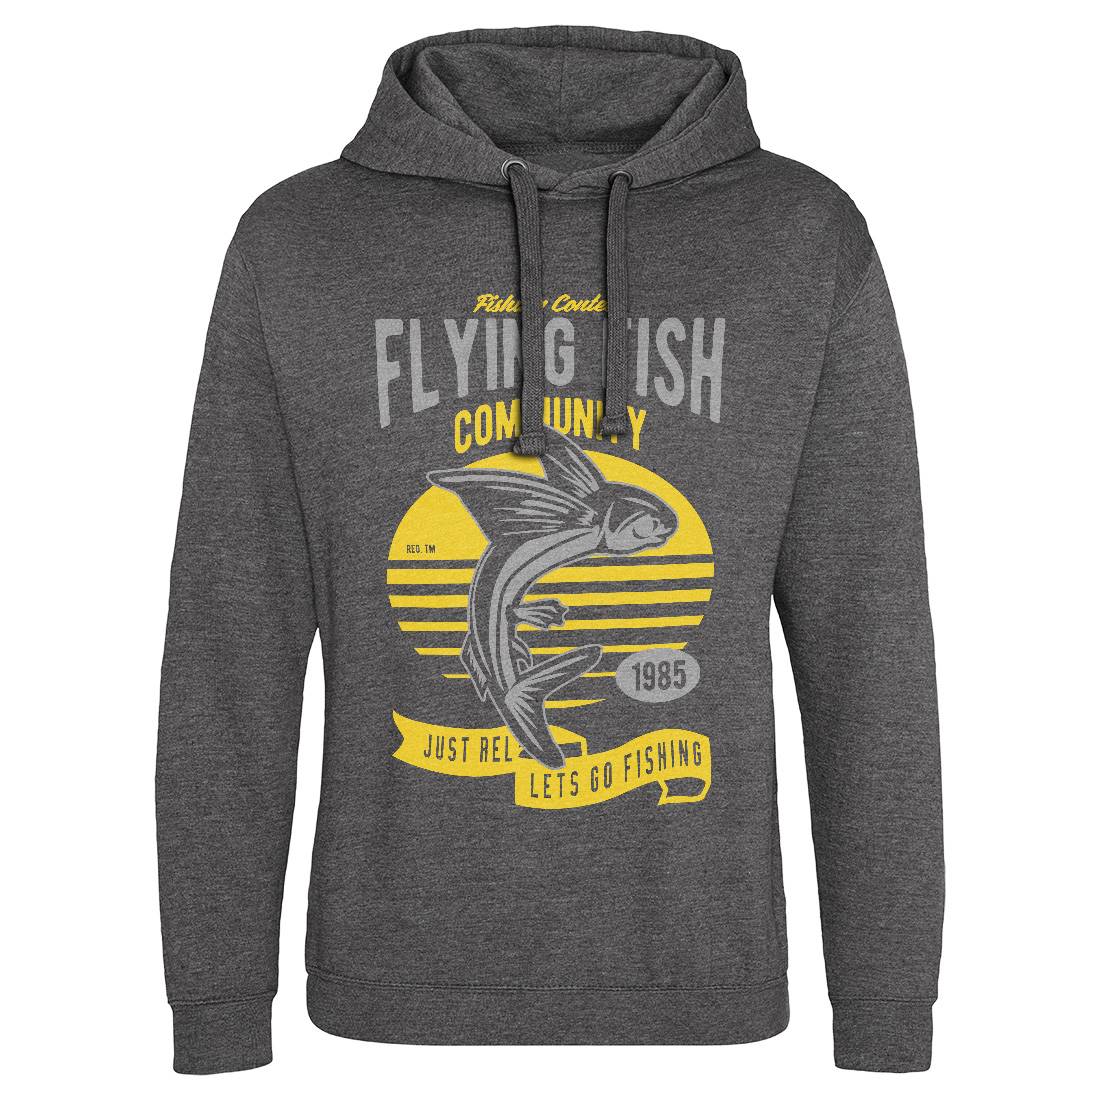 Flying Fish Mens Hoodie Without Pocket Fishing D533